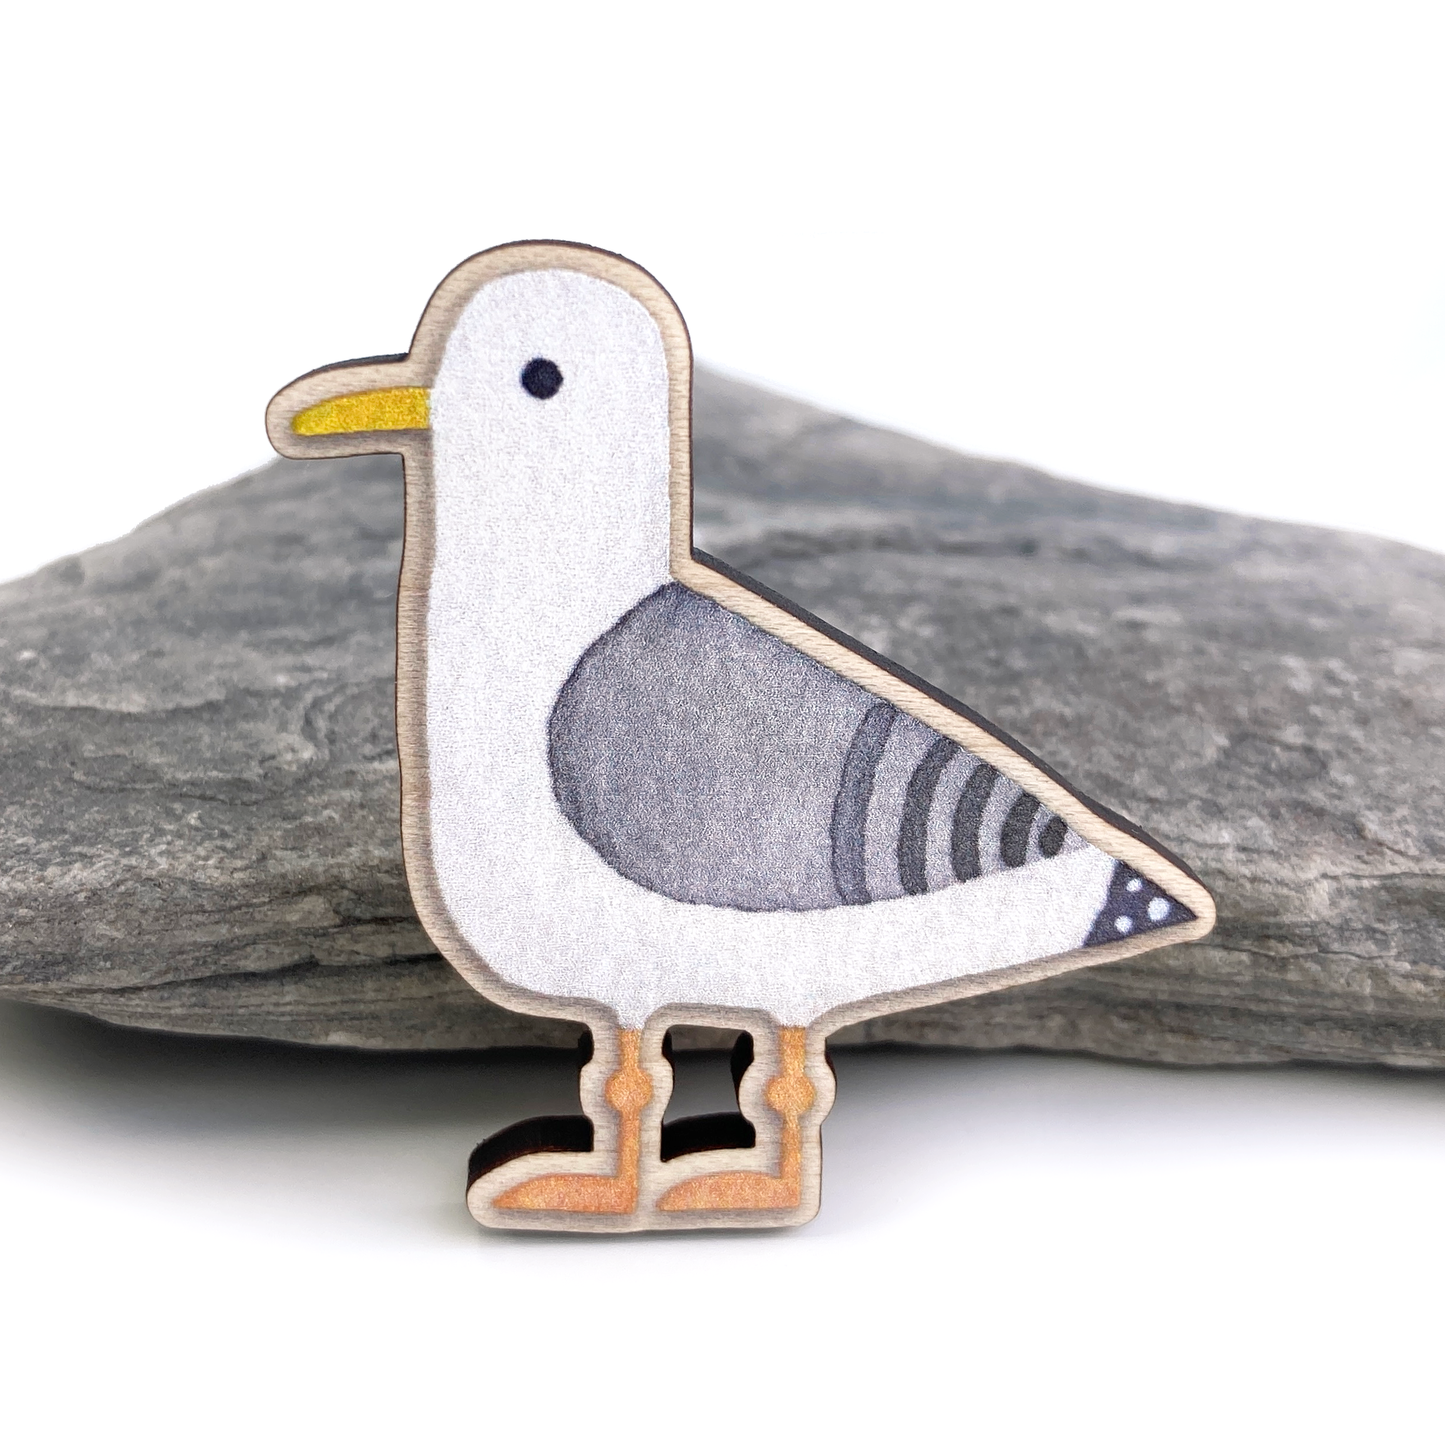 Wooden Fridge Magnet Set x4 - Seagull, Puffins and Seal - Save £4